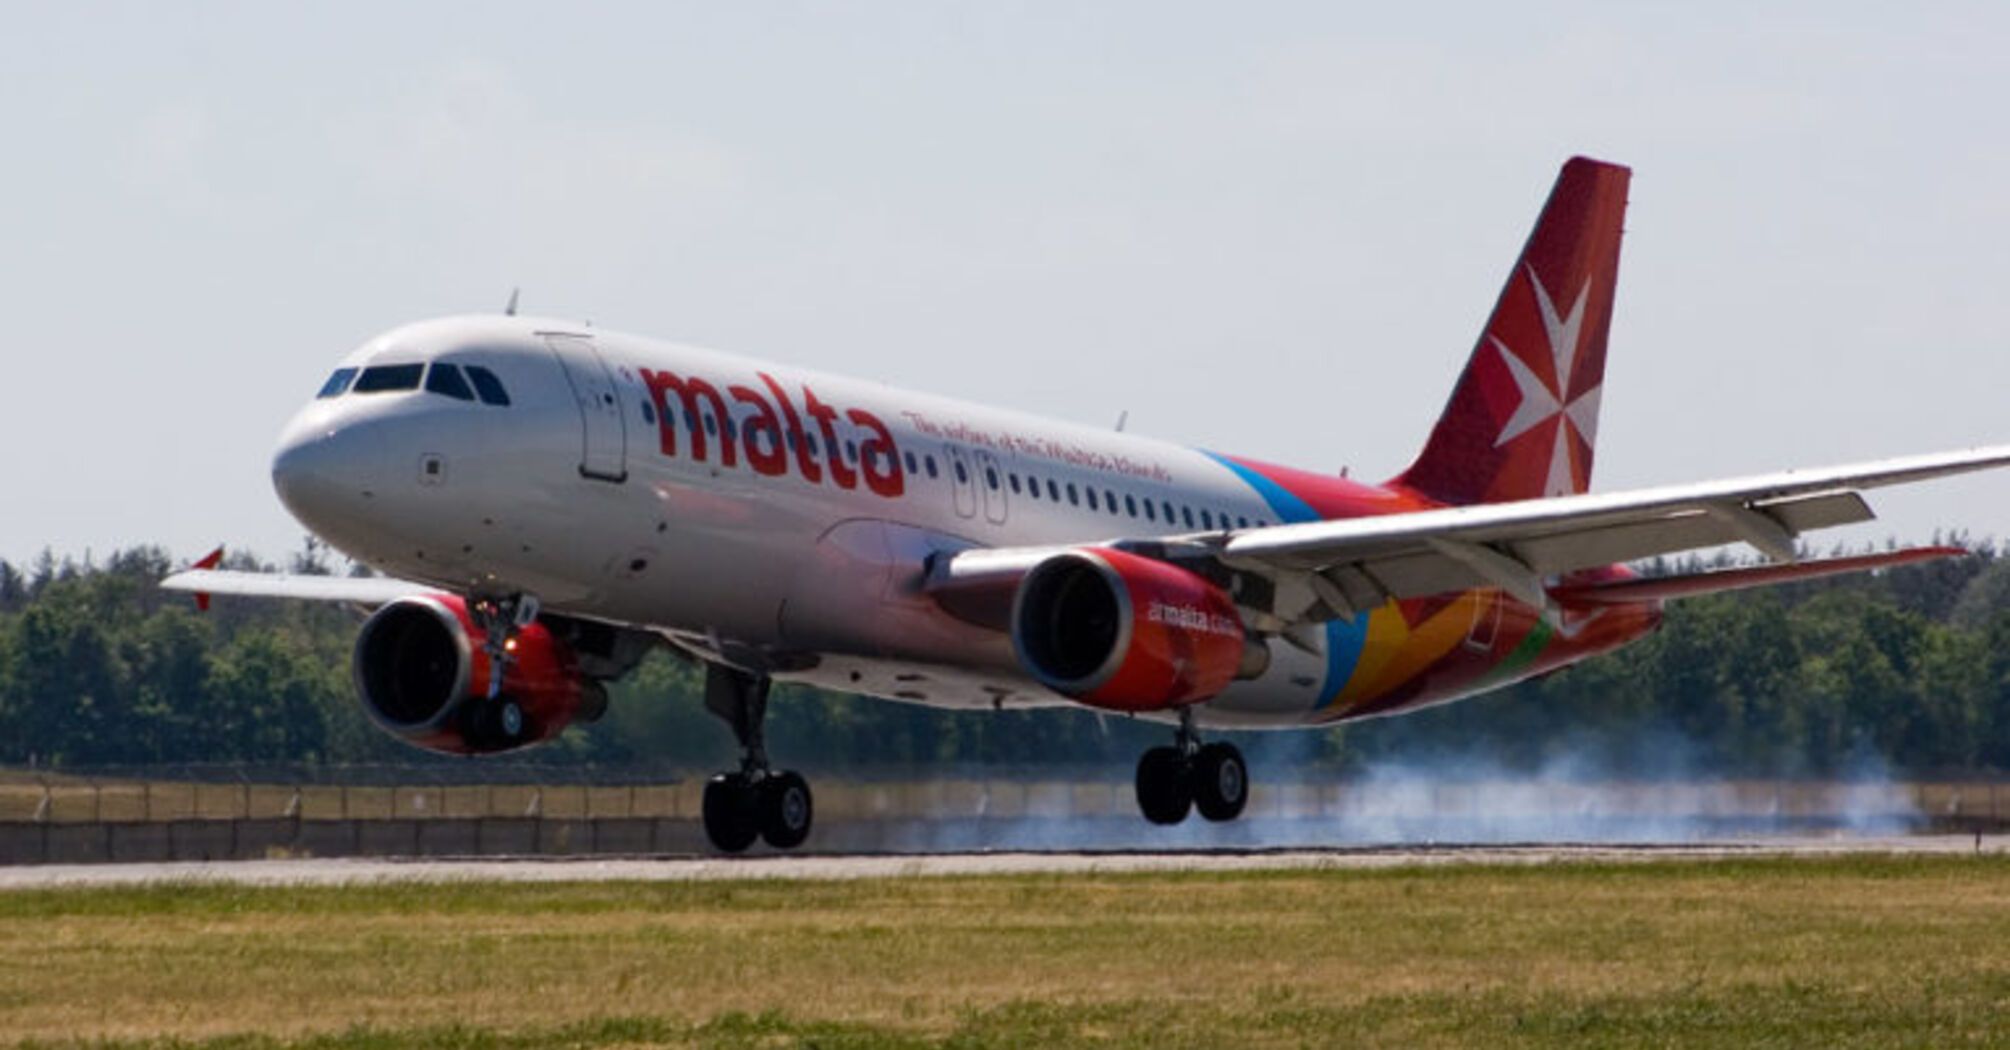 The reason is financial difficulties: Air Malta ceases operations